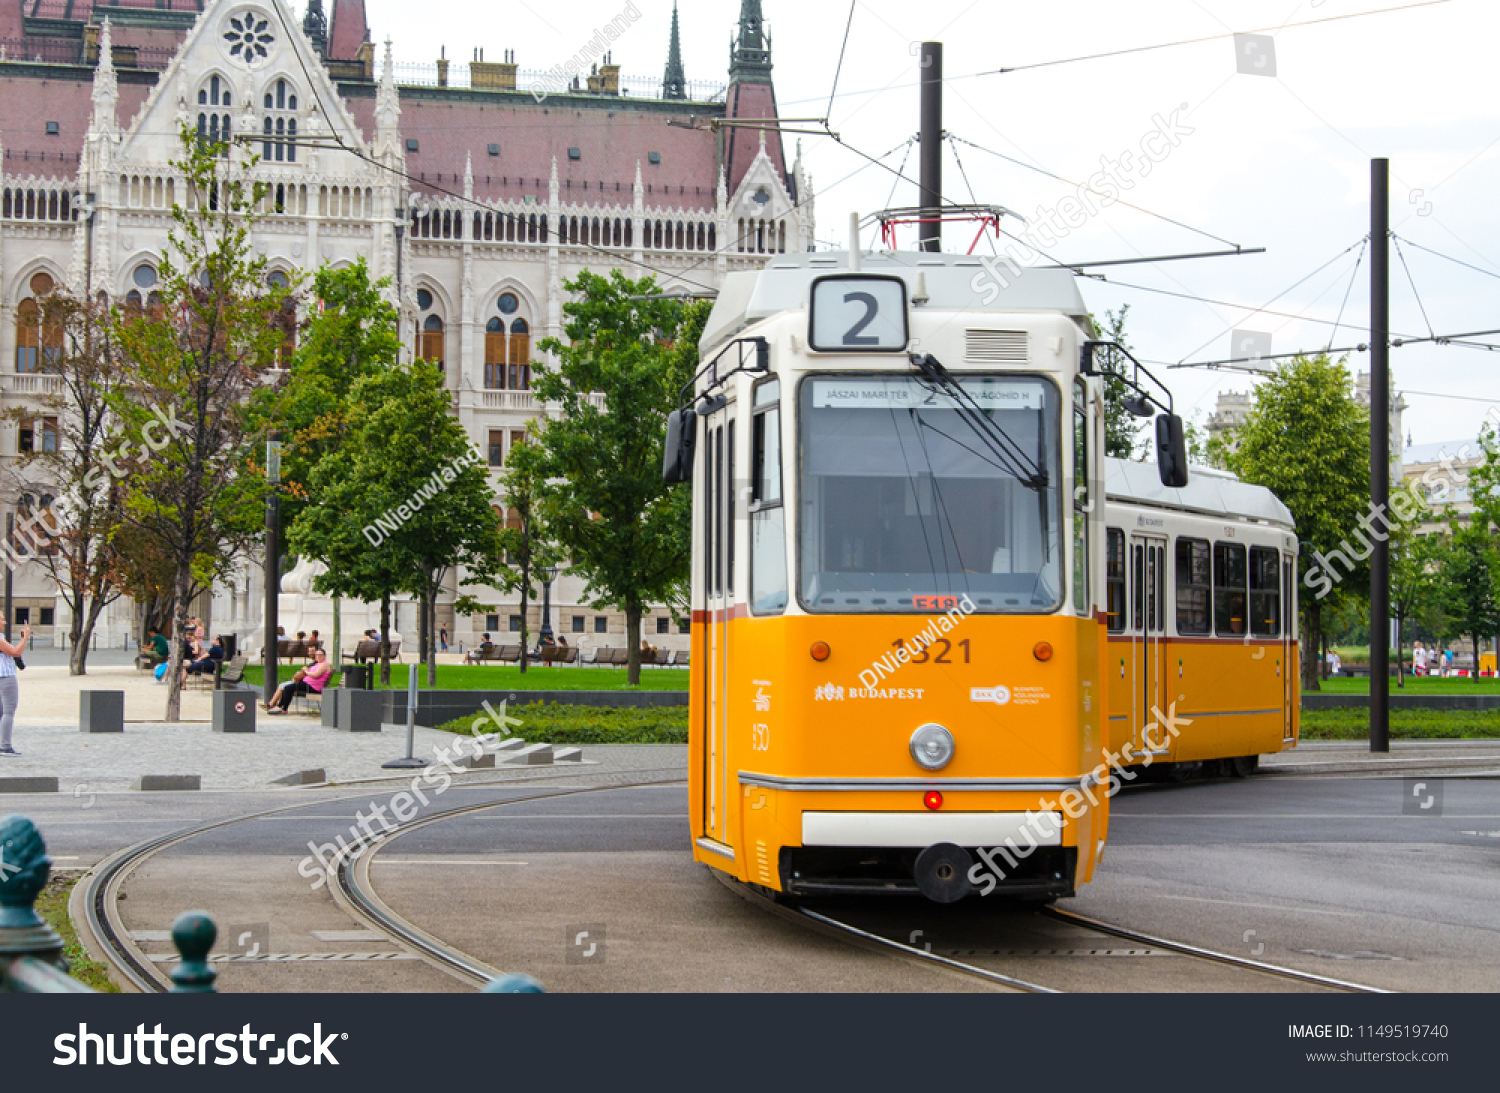 Budapest Hungary 27072018 Tram Driving By Stock Photo Edit Now 1149519740